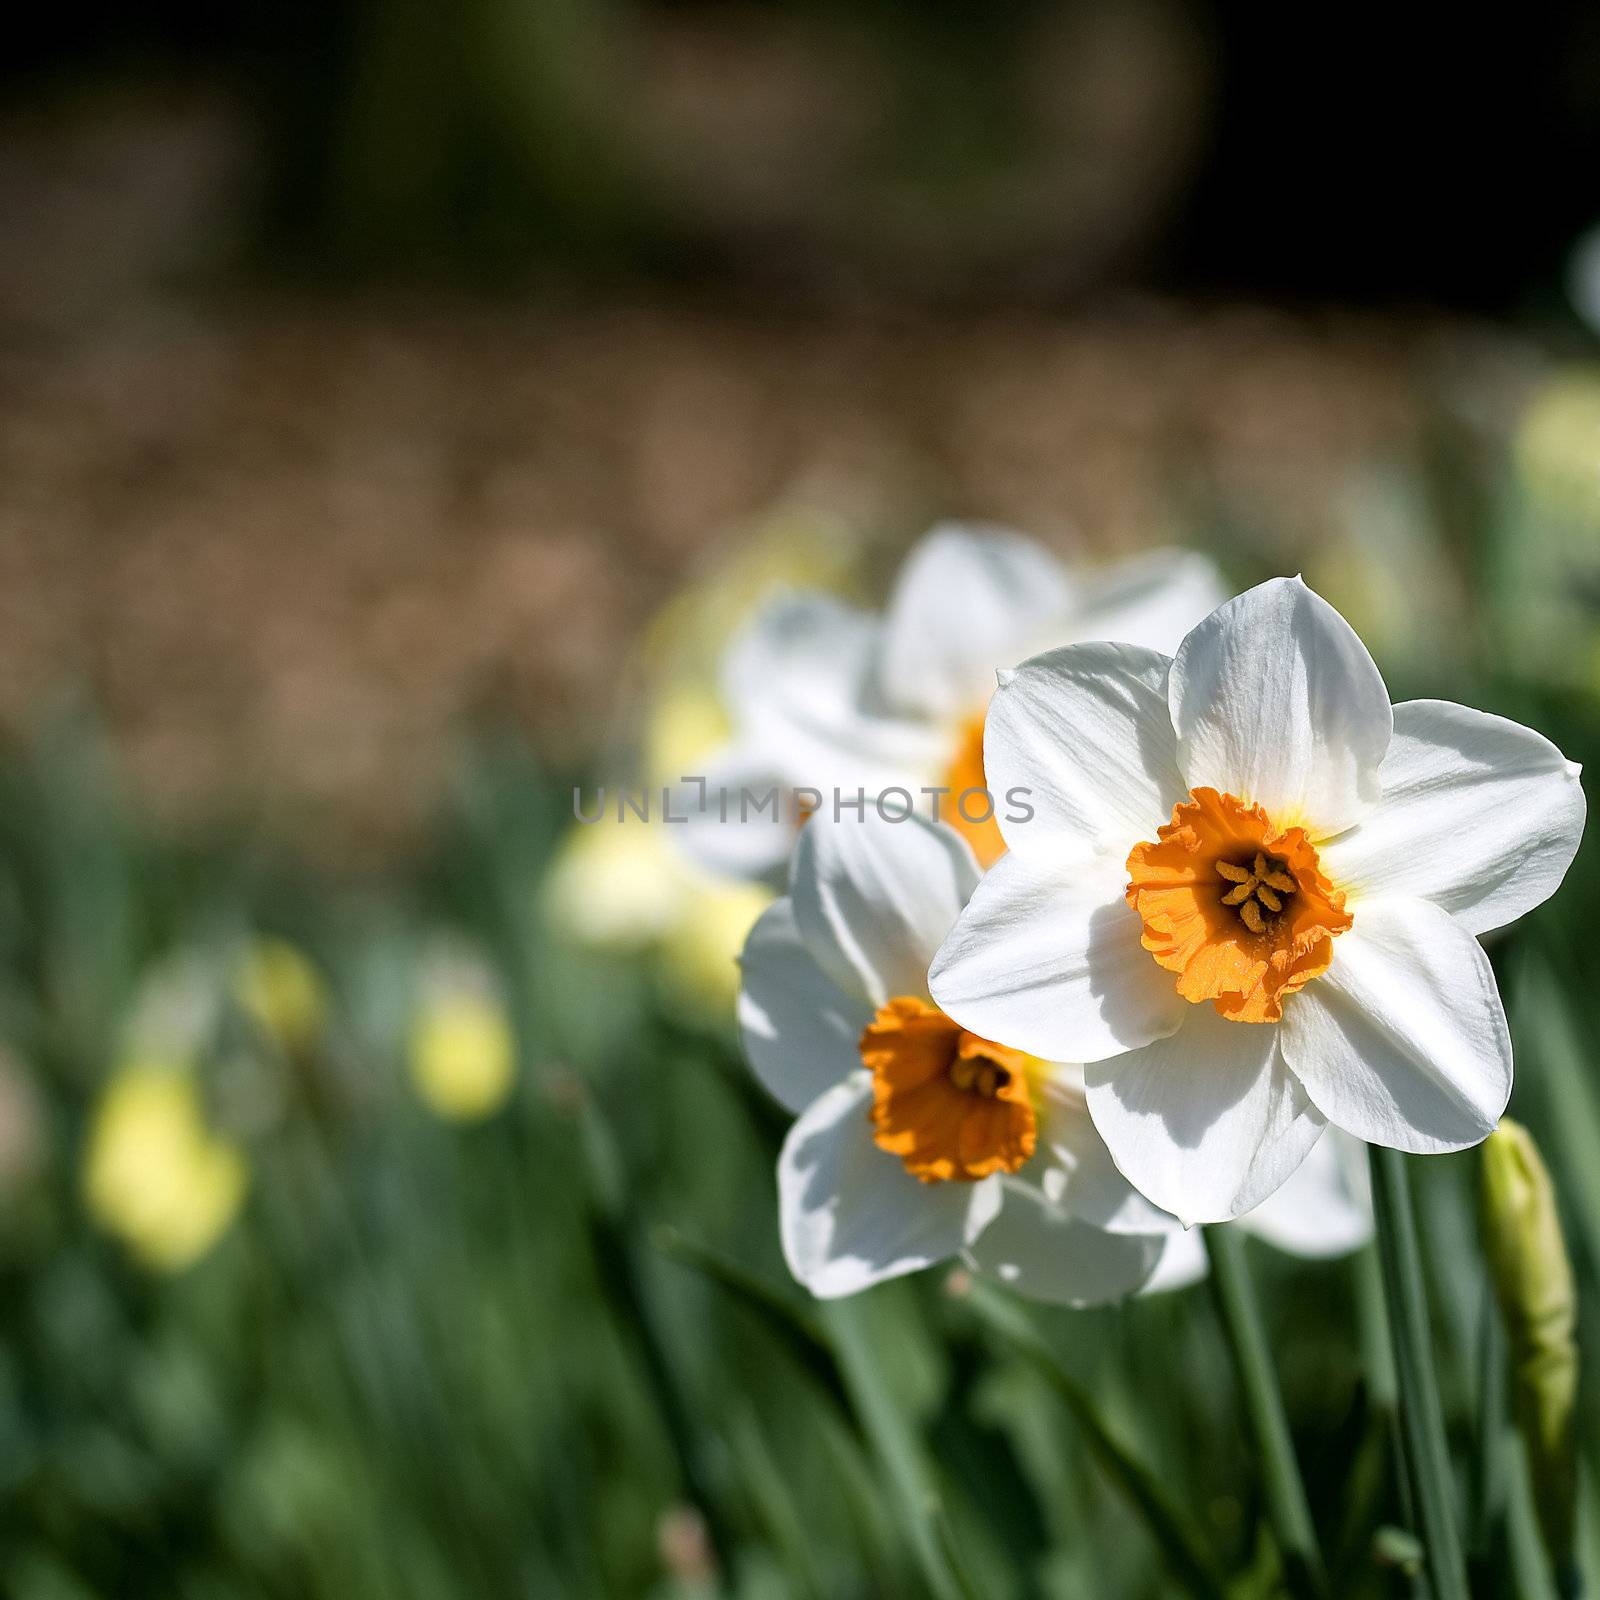 narcissus - spring in the park